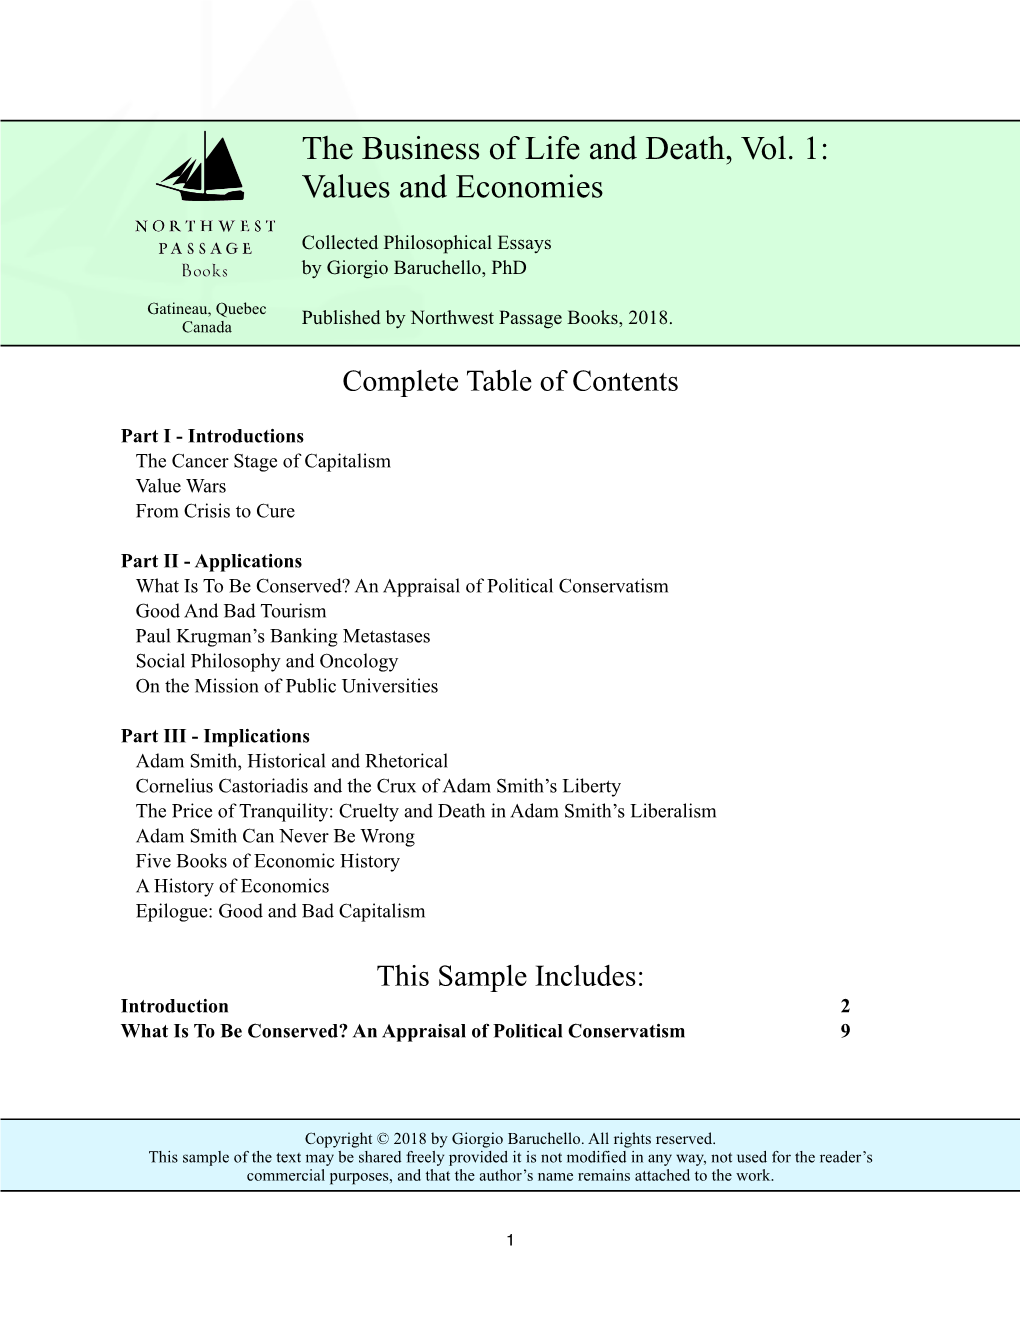 The Business of Life and Death, Vol. 1: Values and Economies